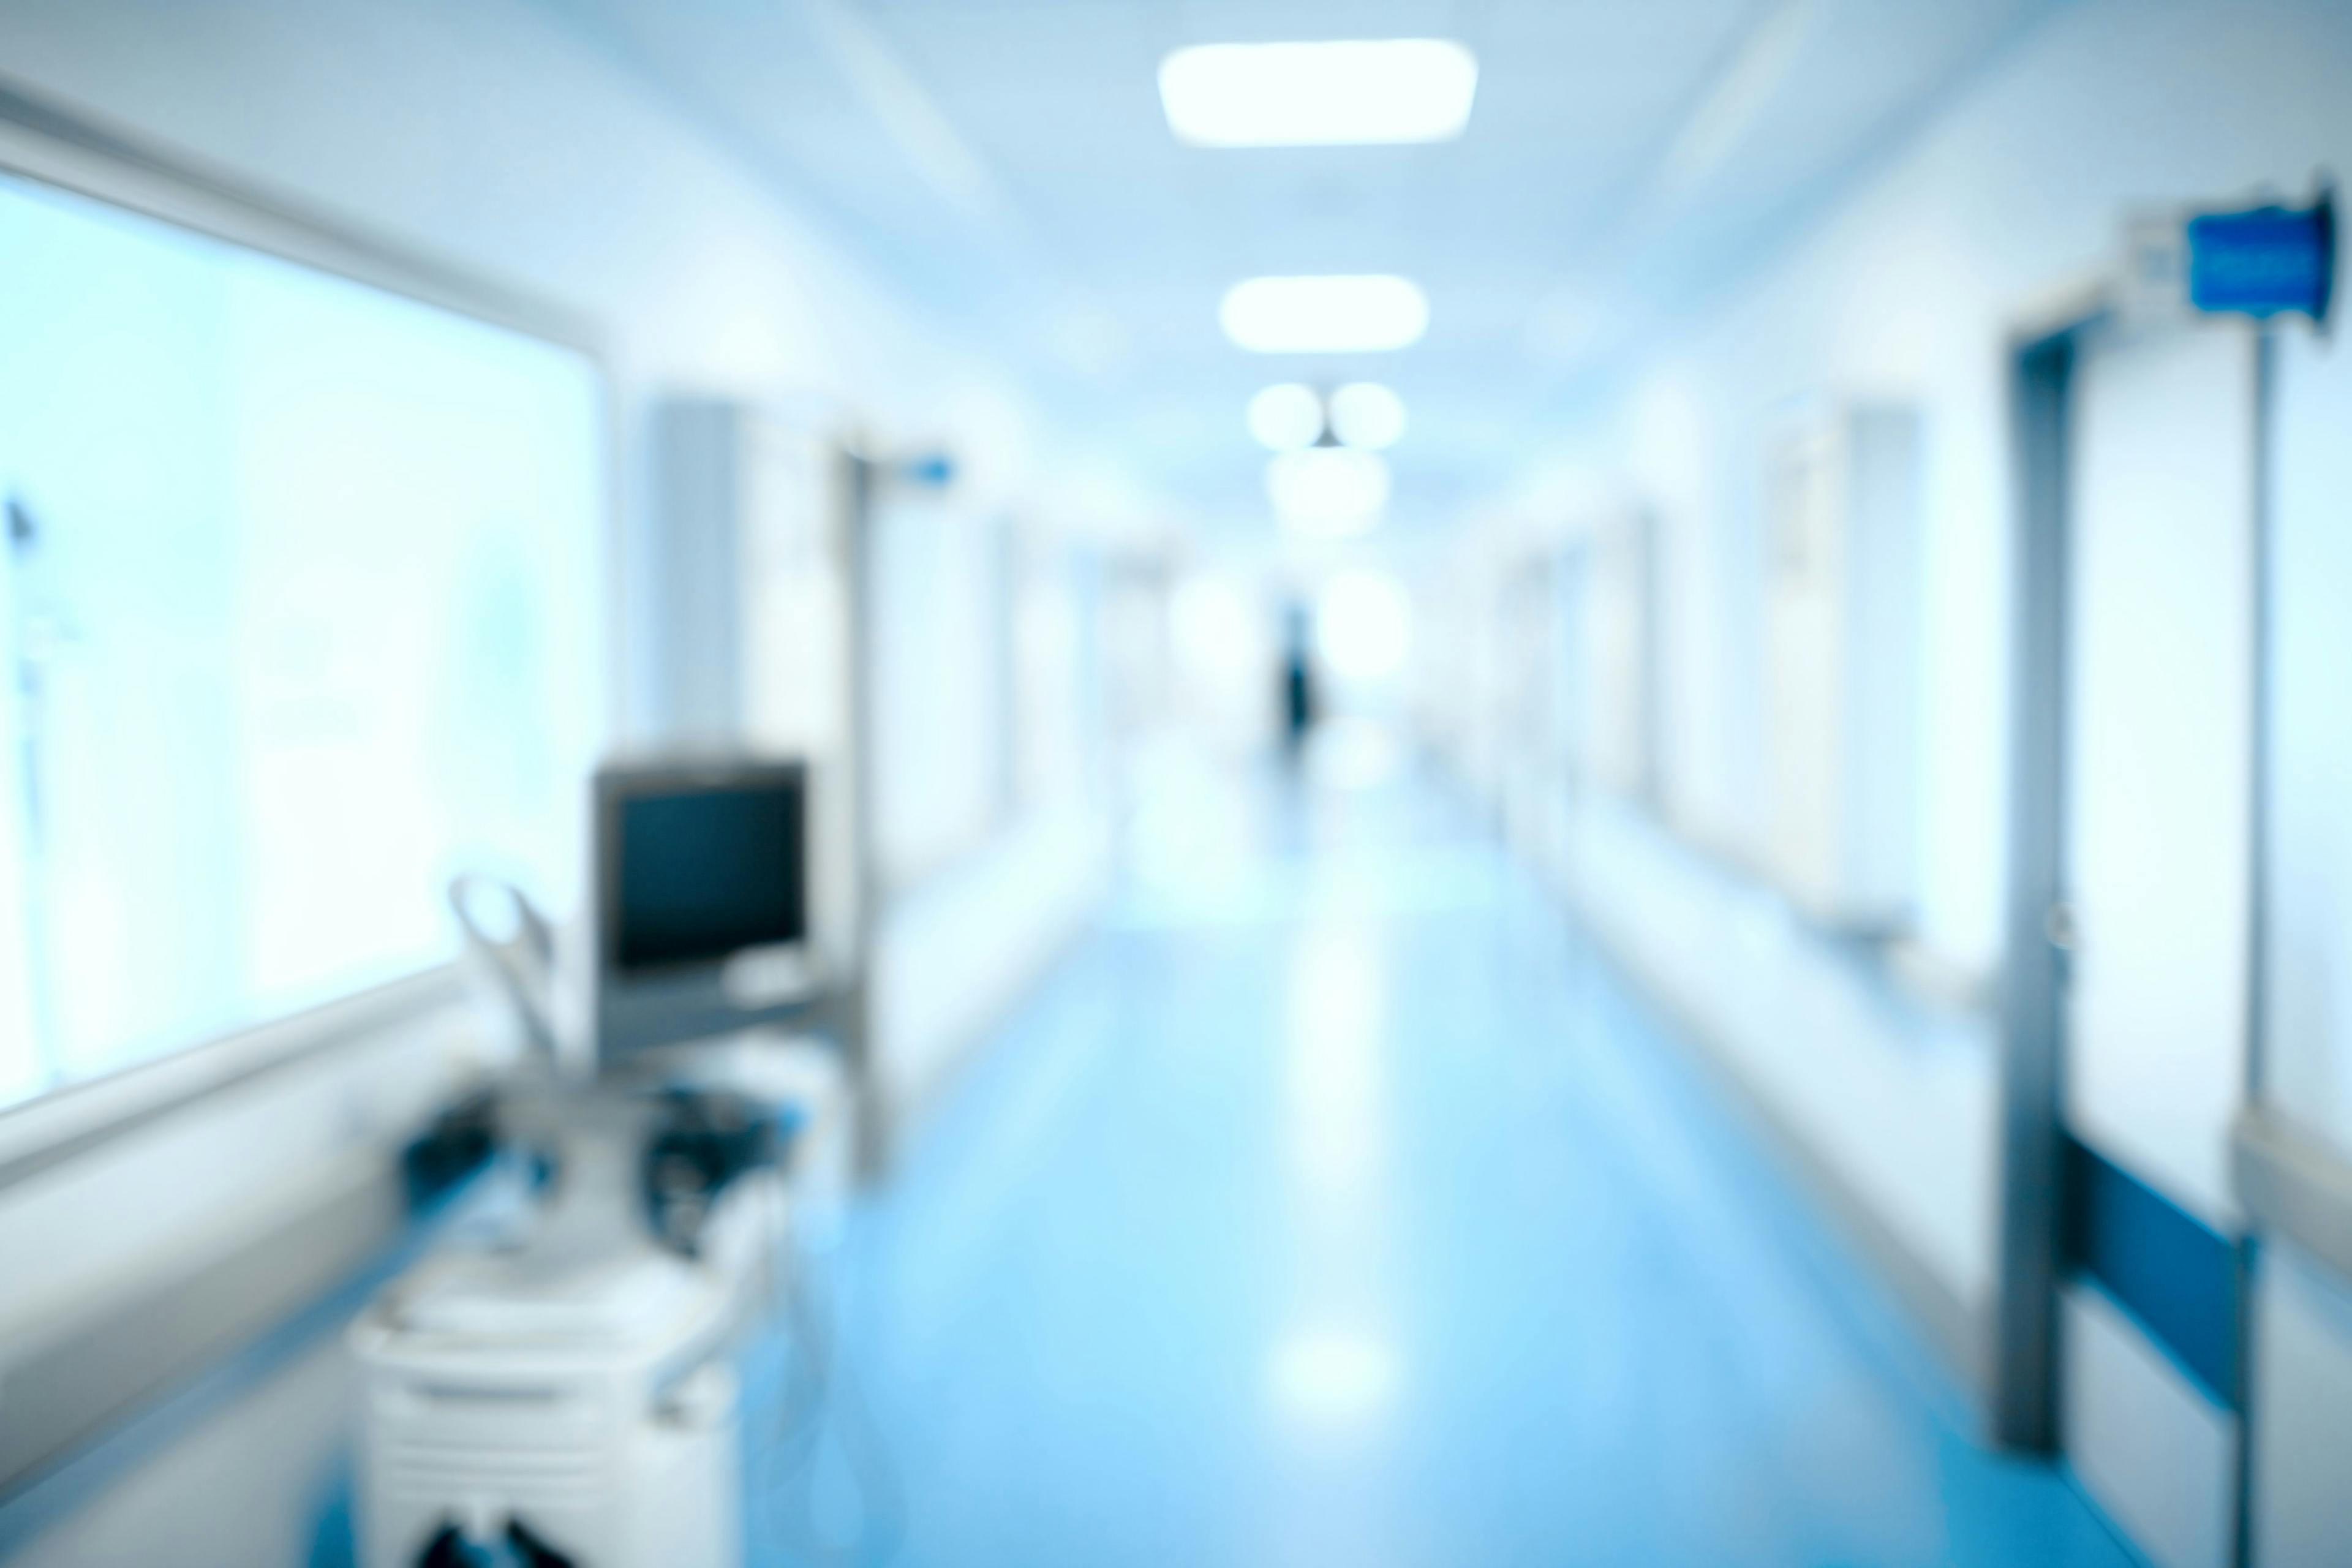 Could more transparency improve hospital capacity?